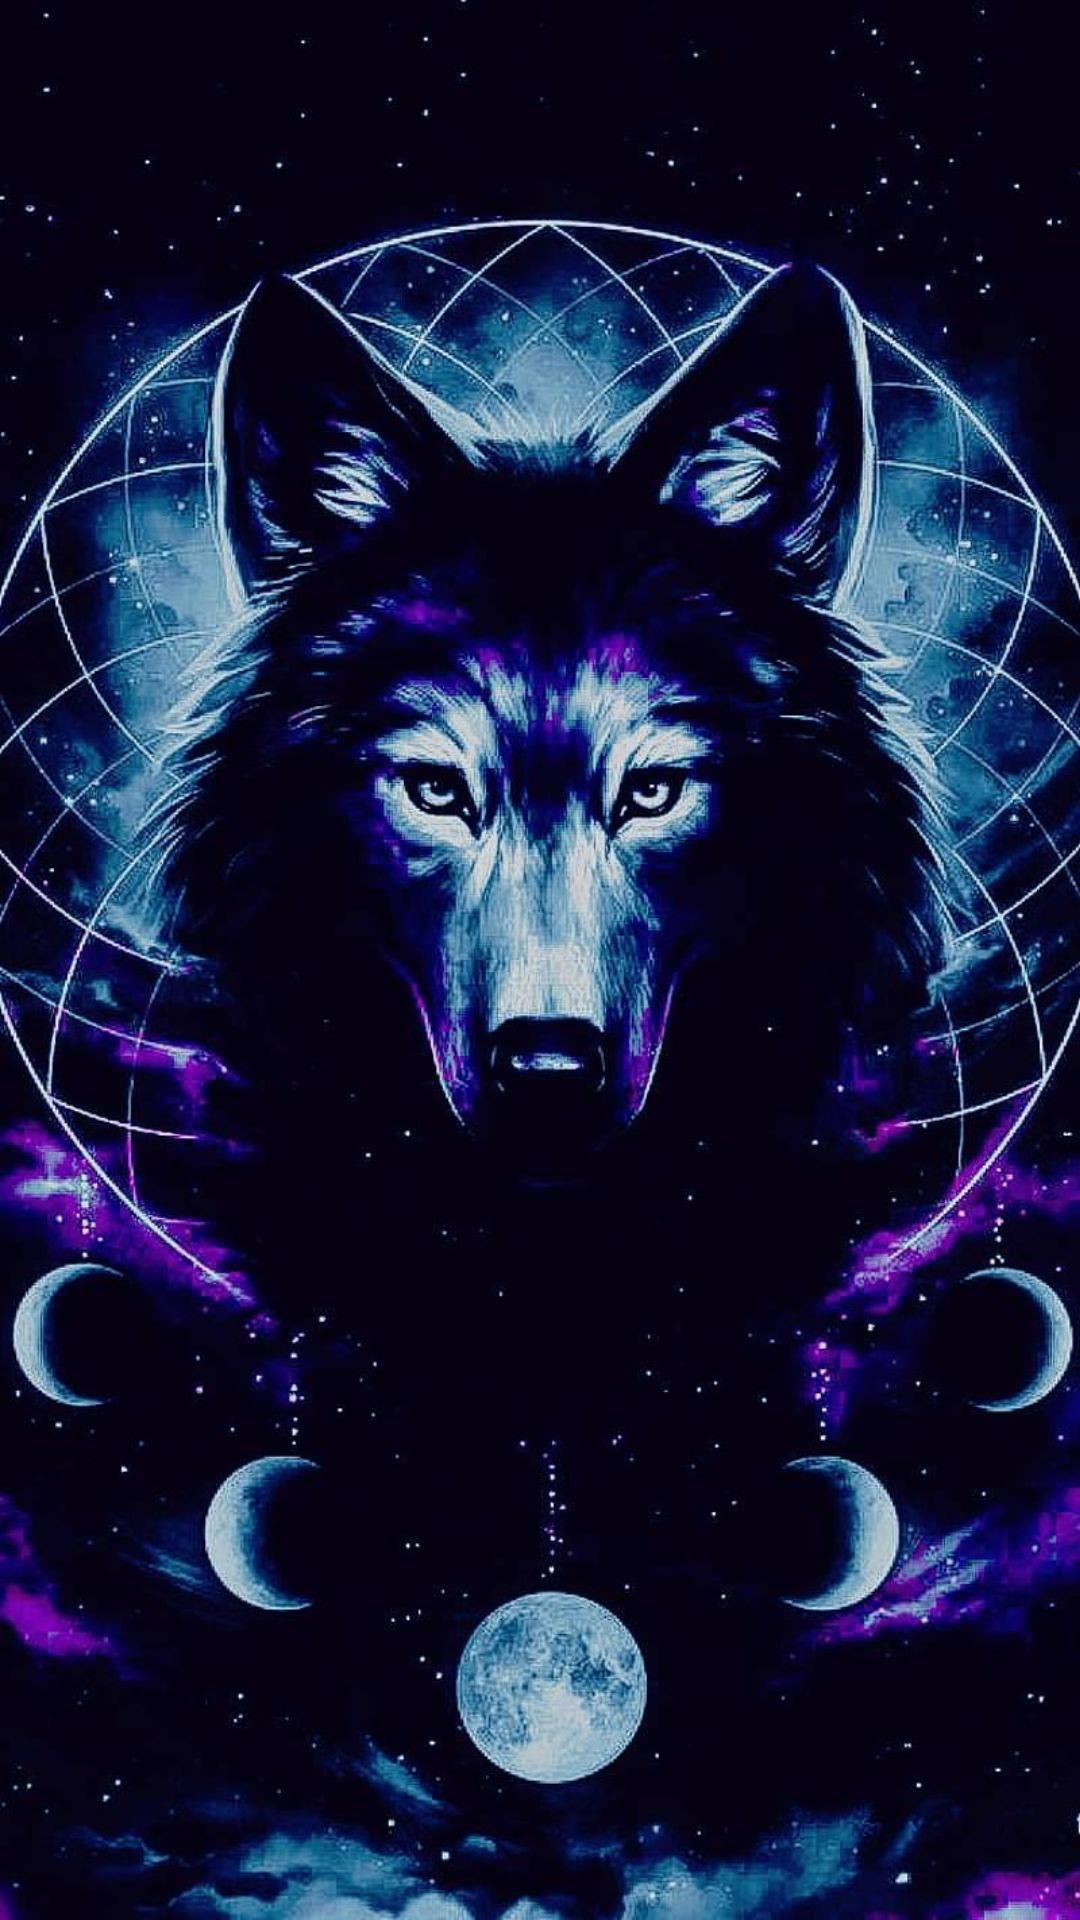 1080x1920 Wolf 4k Wallpapers Top Ultra 4k Wolf Backgrounds Download